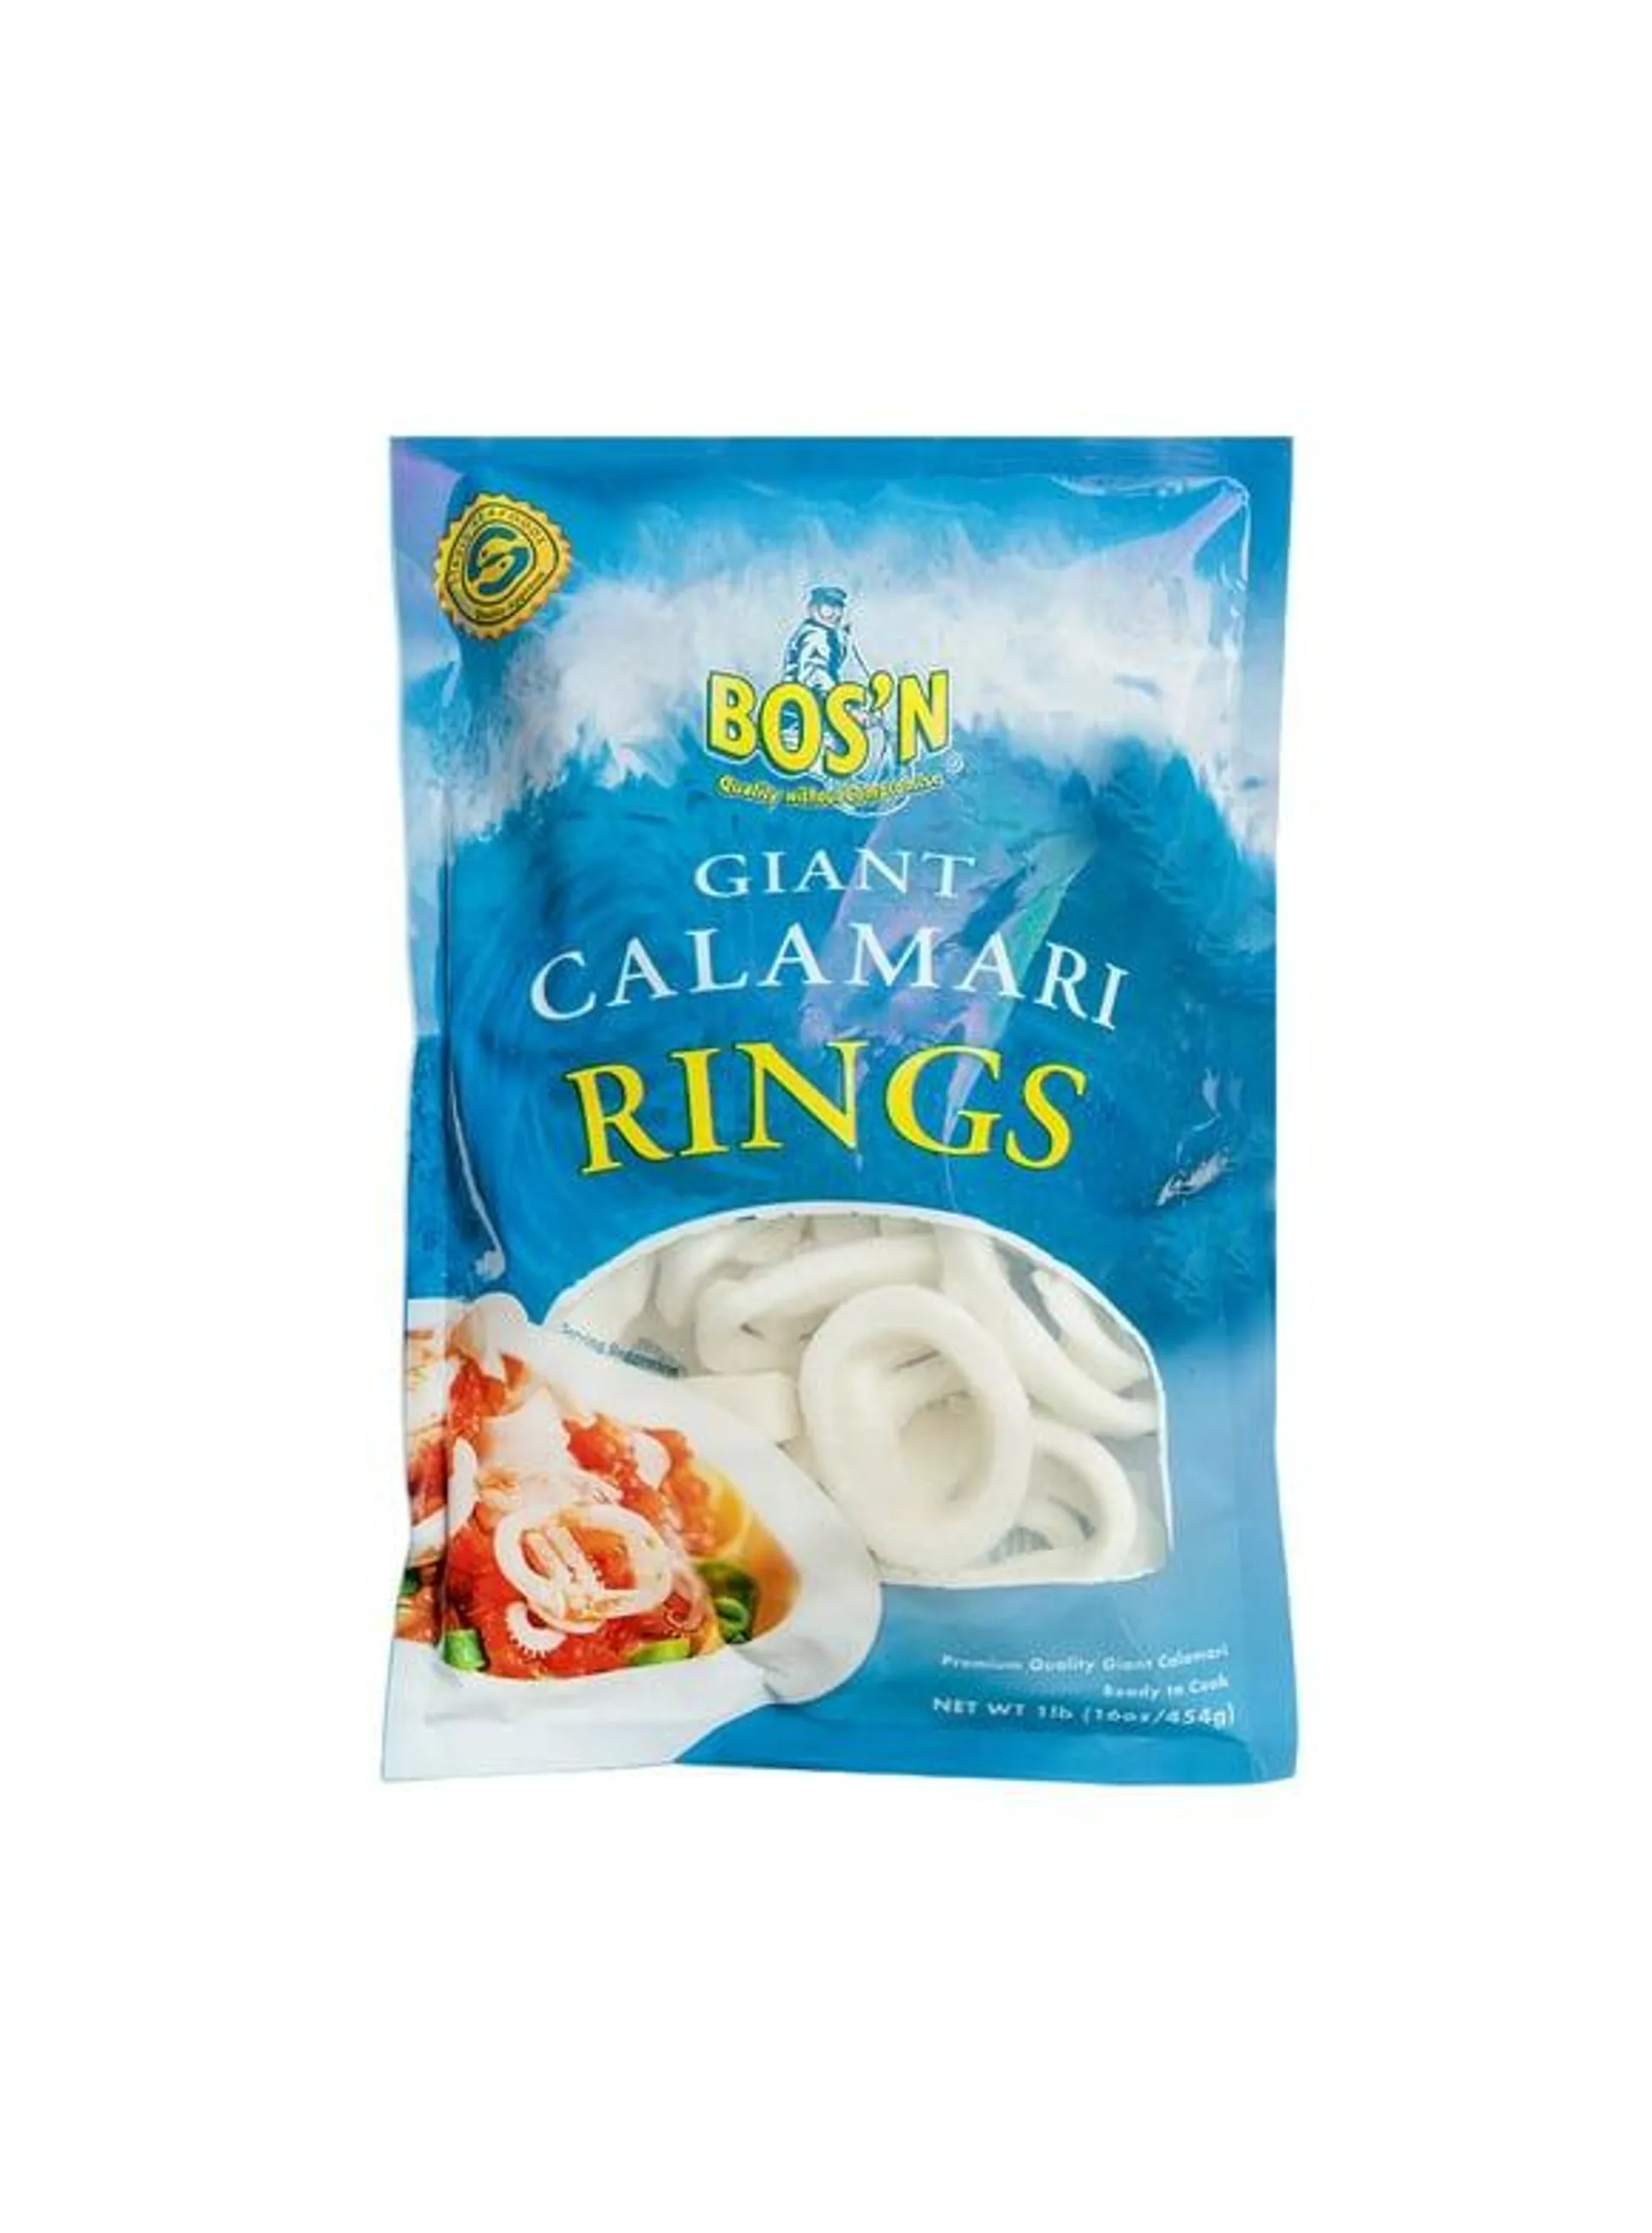 Bosn Frozen Seafood Raw Giant Calamari Rings, 1 lb. Fully Cleaned and Ready-to-Cook. 14g Protein per Serving. Contains: Squid.